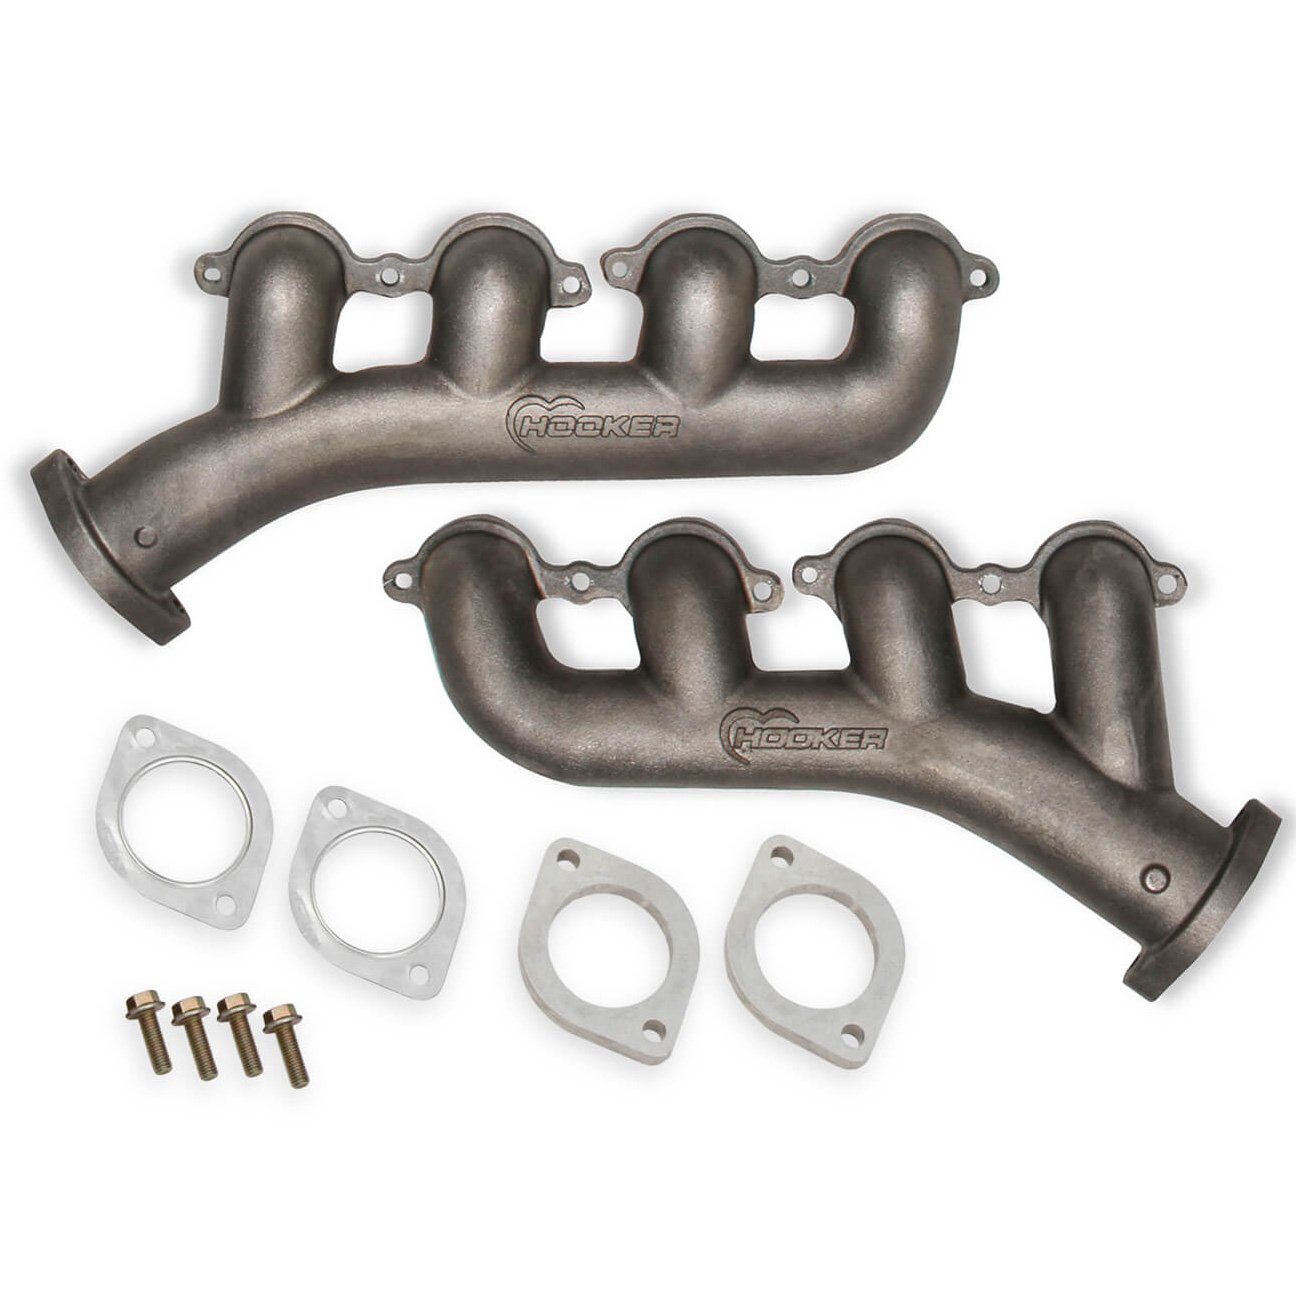 71223026HKR BlackHeart Exhaust Manifolds for 1982-2004 GM S-10, Sonoma LS Swap